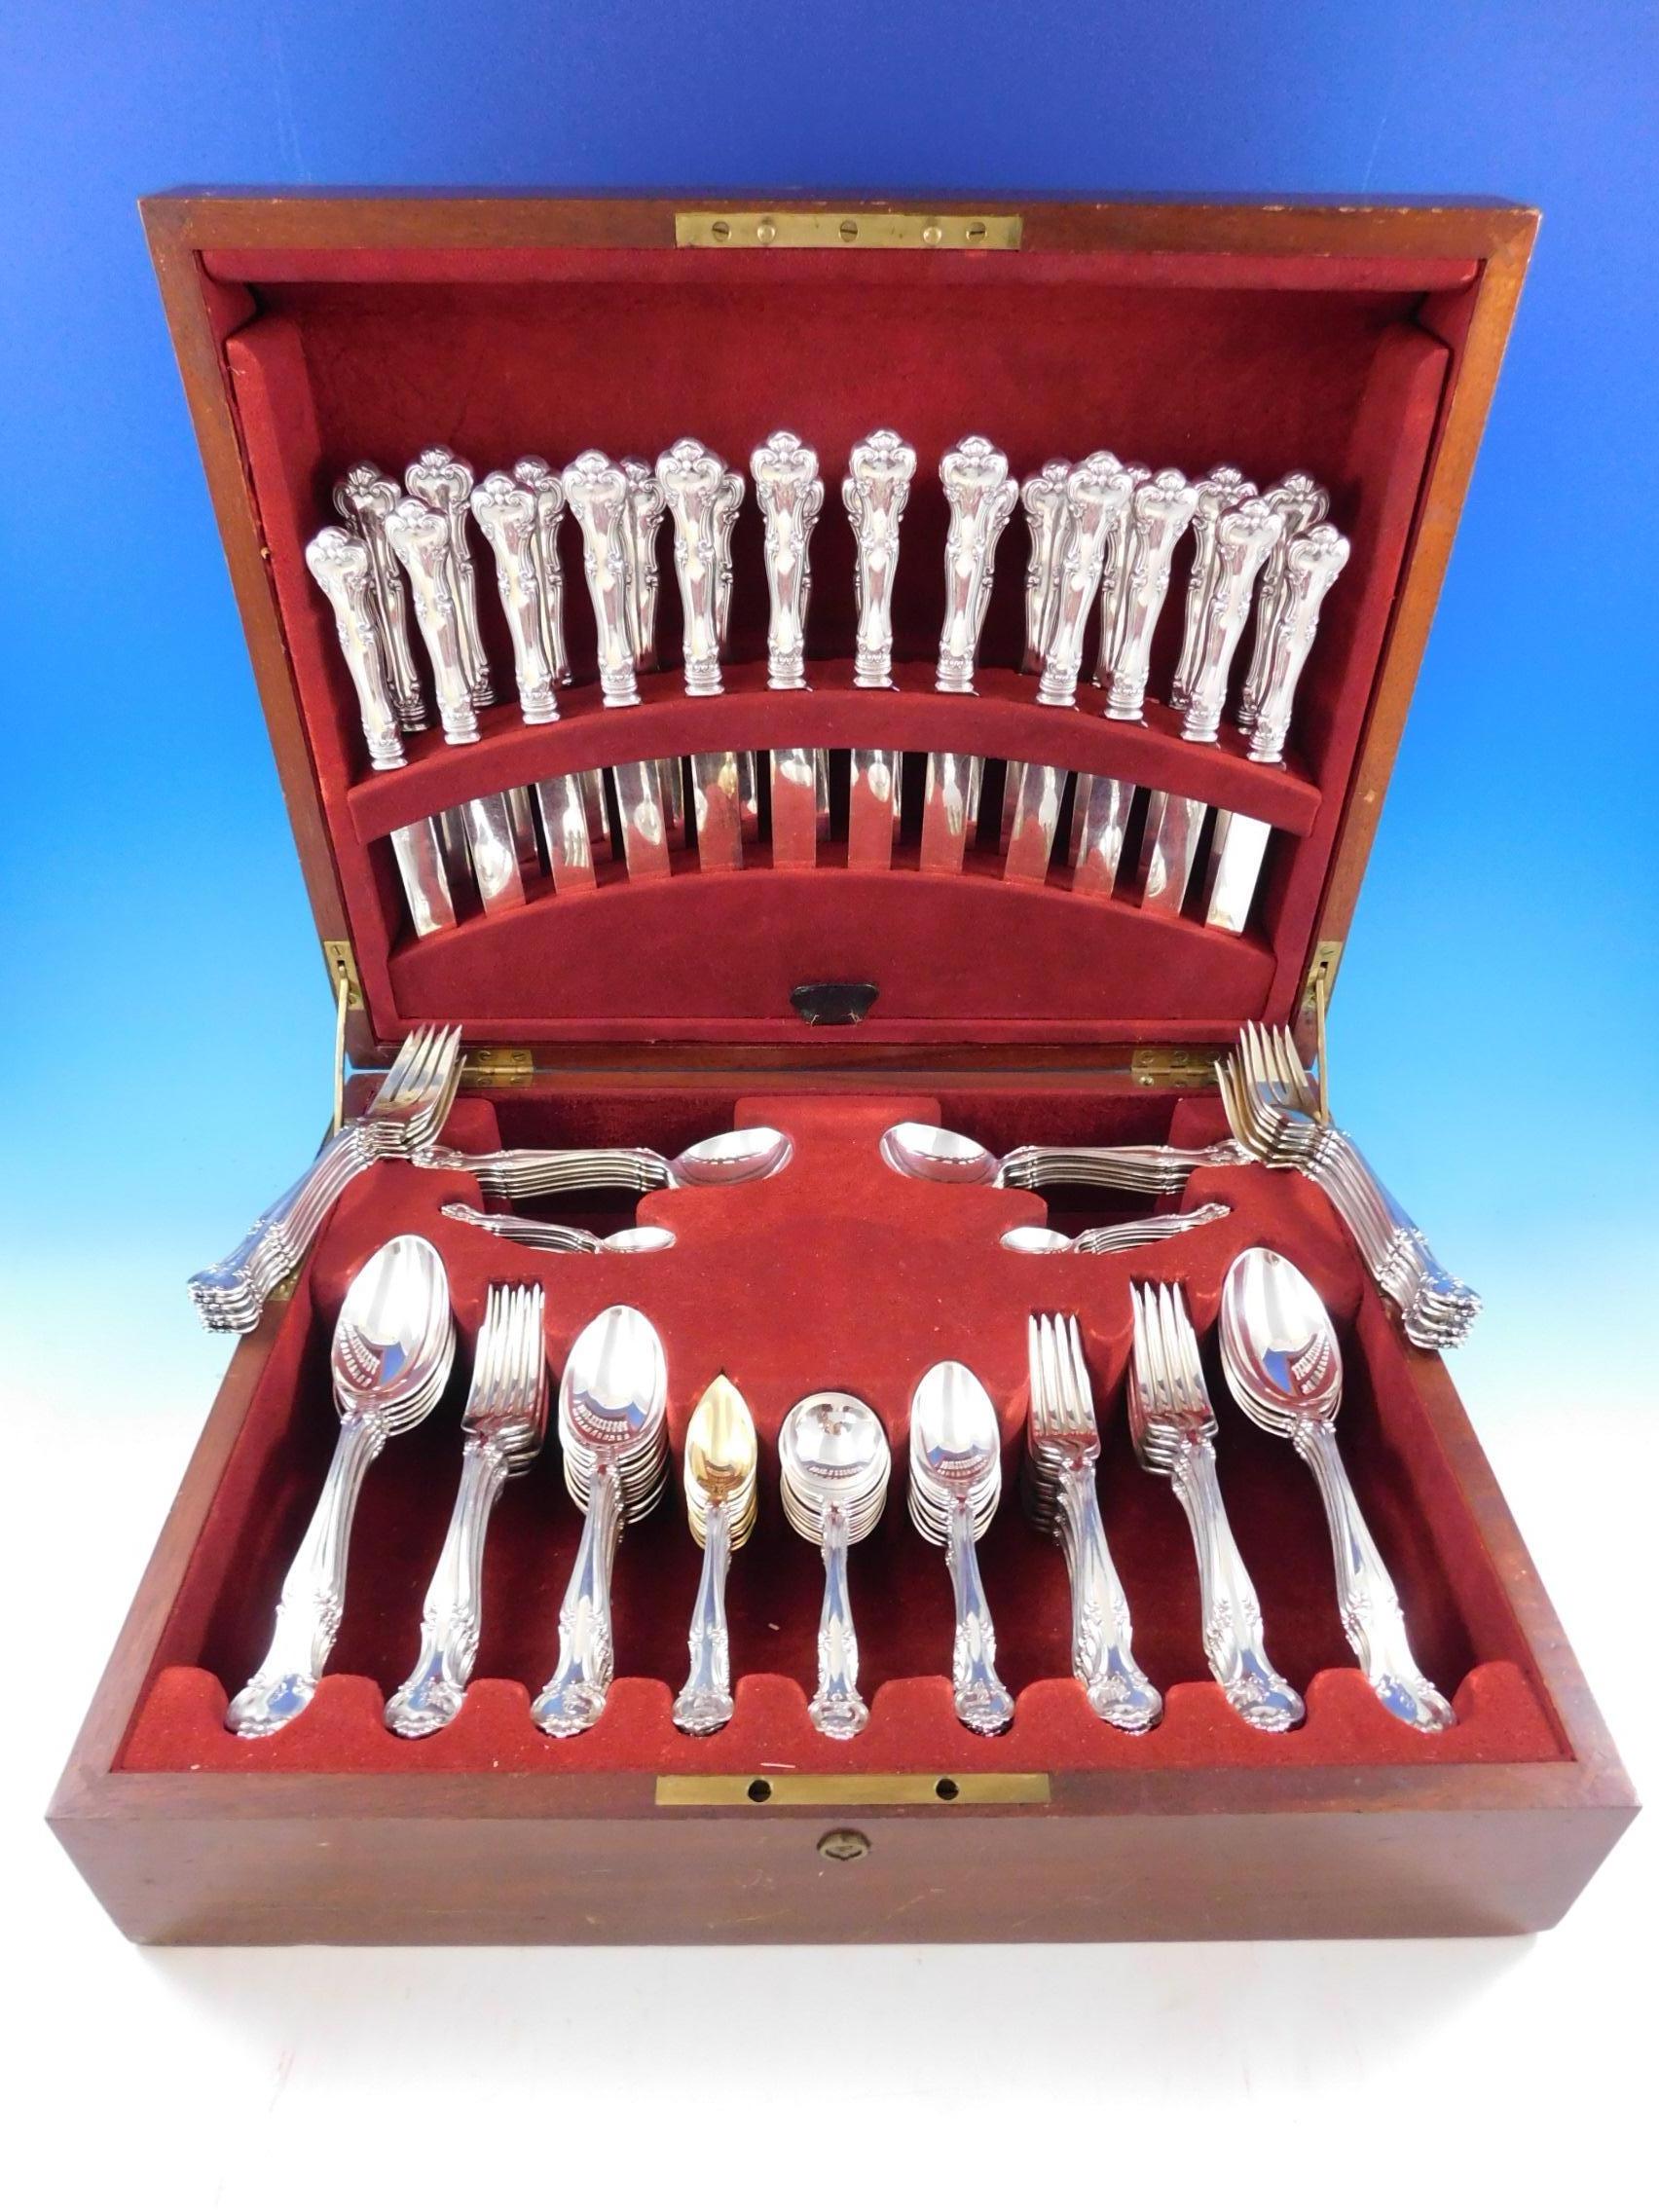 Outstanding cromwell by Gorham sterling silver flatware set with 